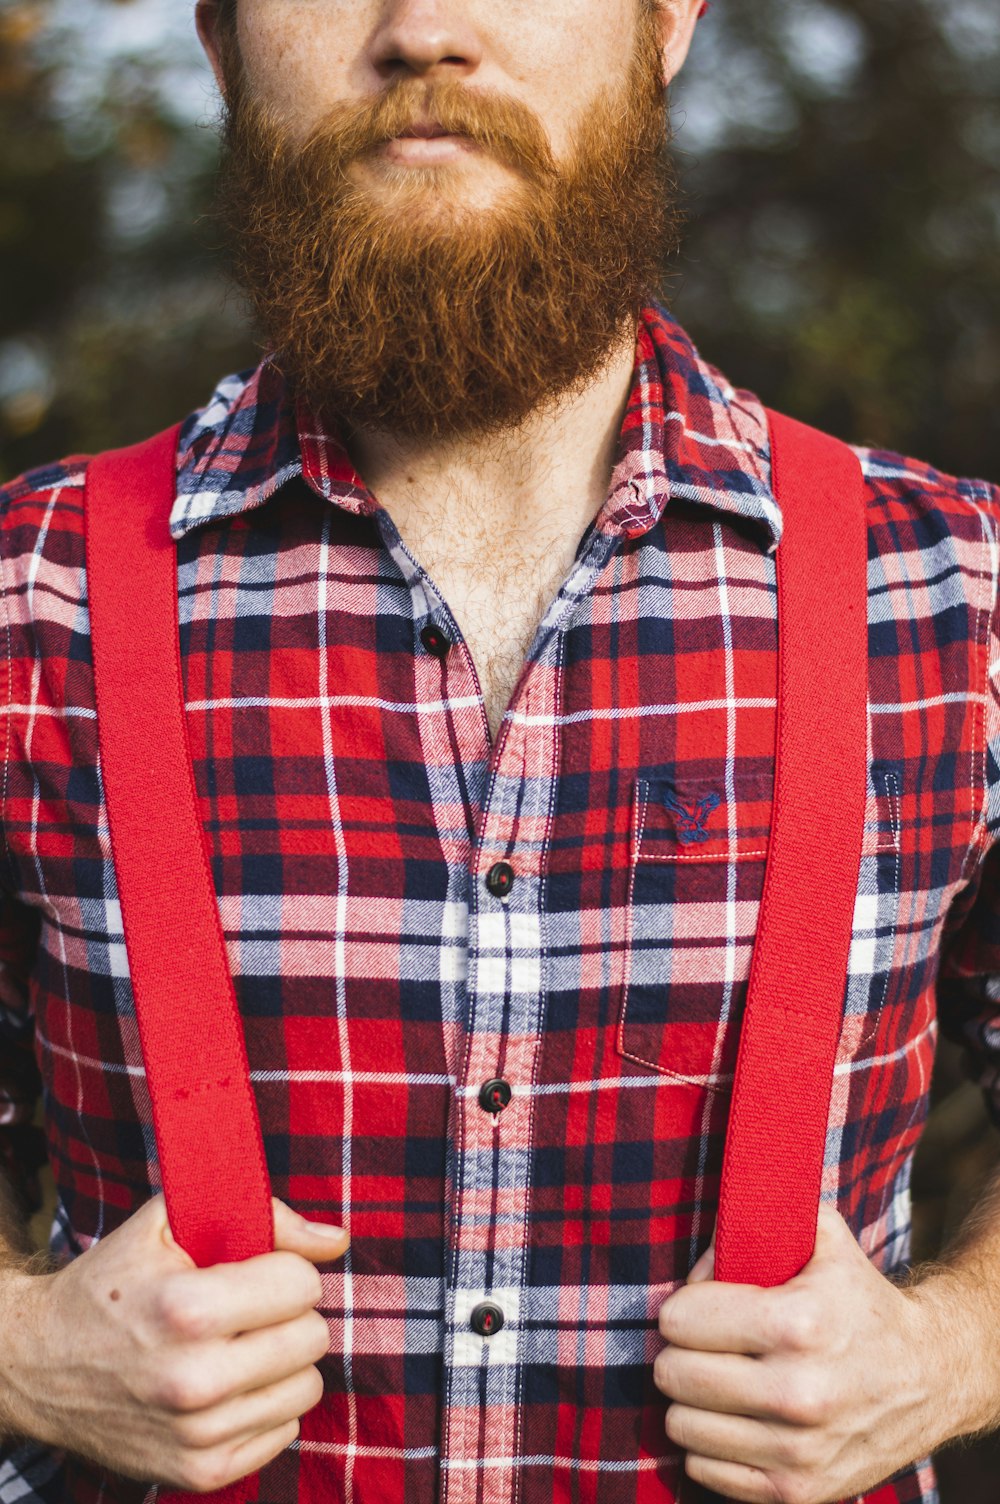 man in red, blue, and white plaid dress shirt with red suspender during daytime